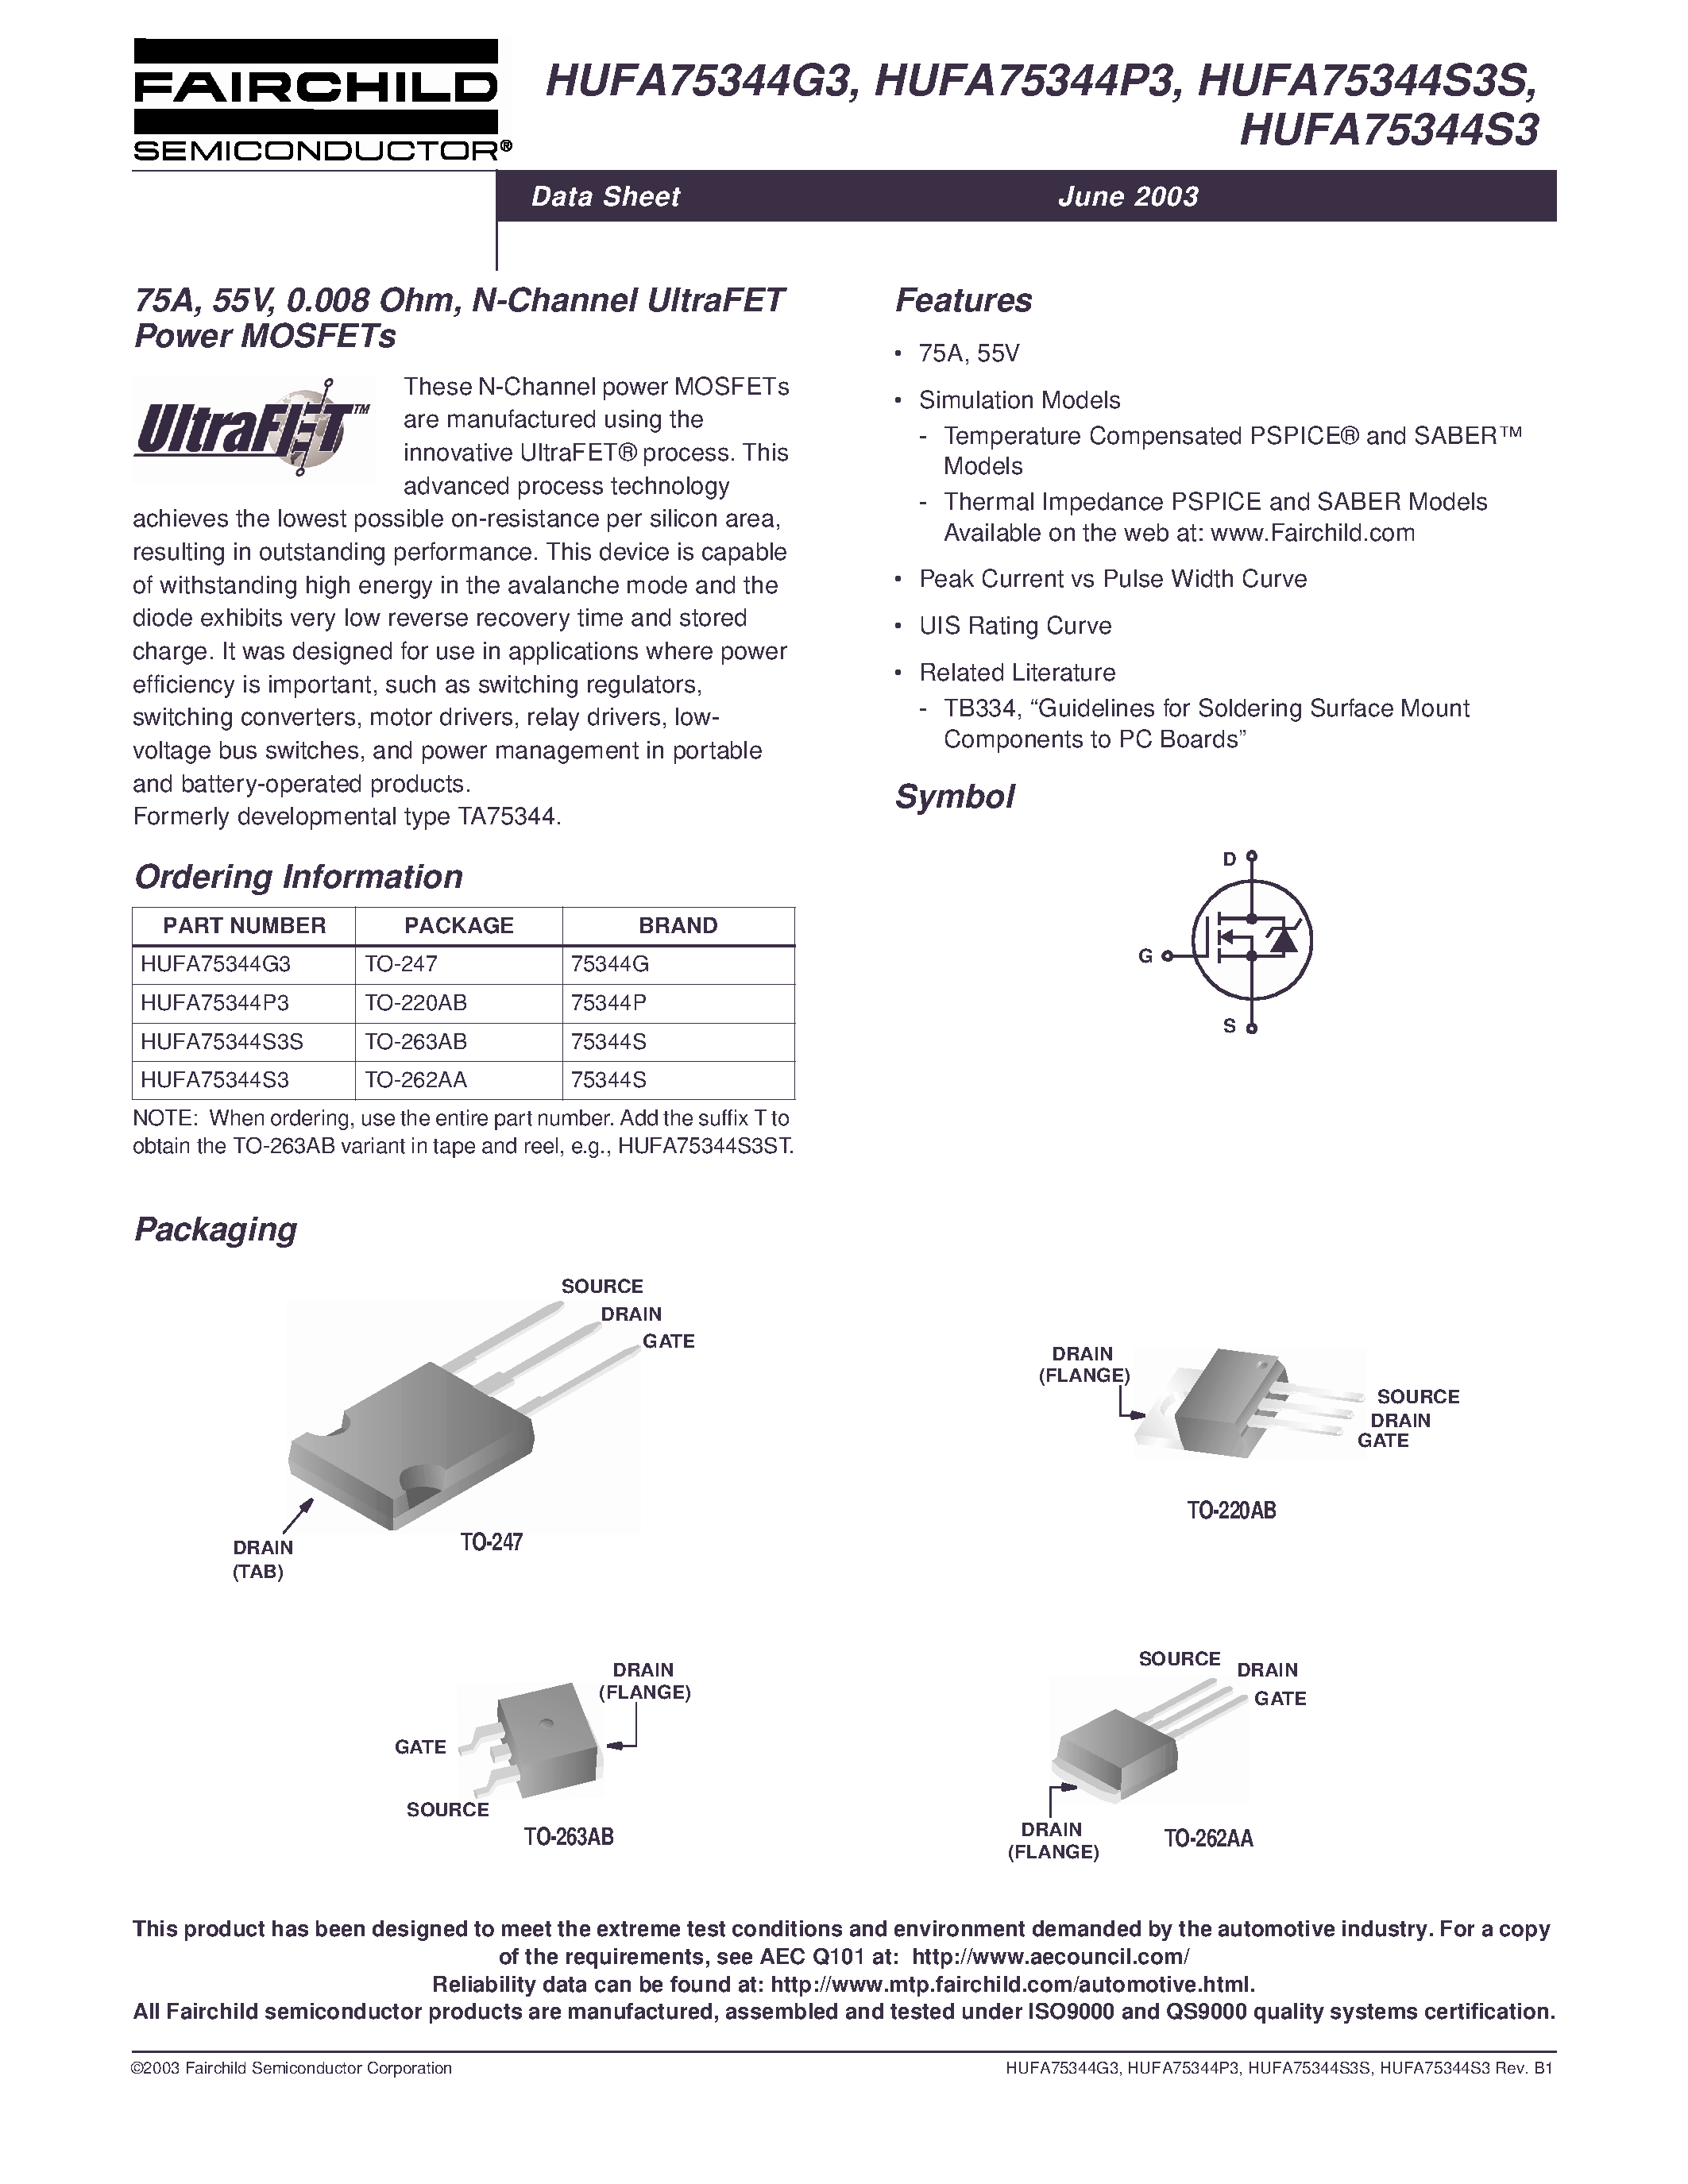 Datasheet HUFA75344G3 - 75A/ 55V/ 0.008 Ohm/ N-Channel UltraFET Power MOSFETs page 1